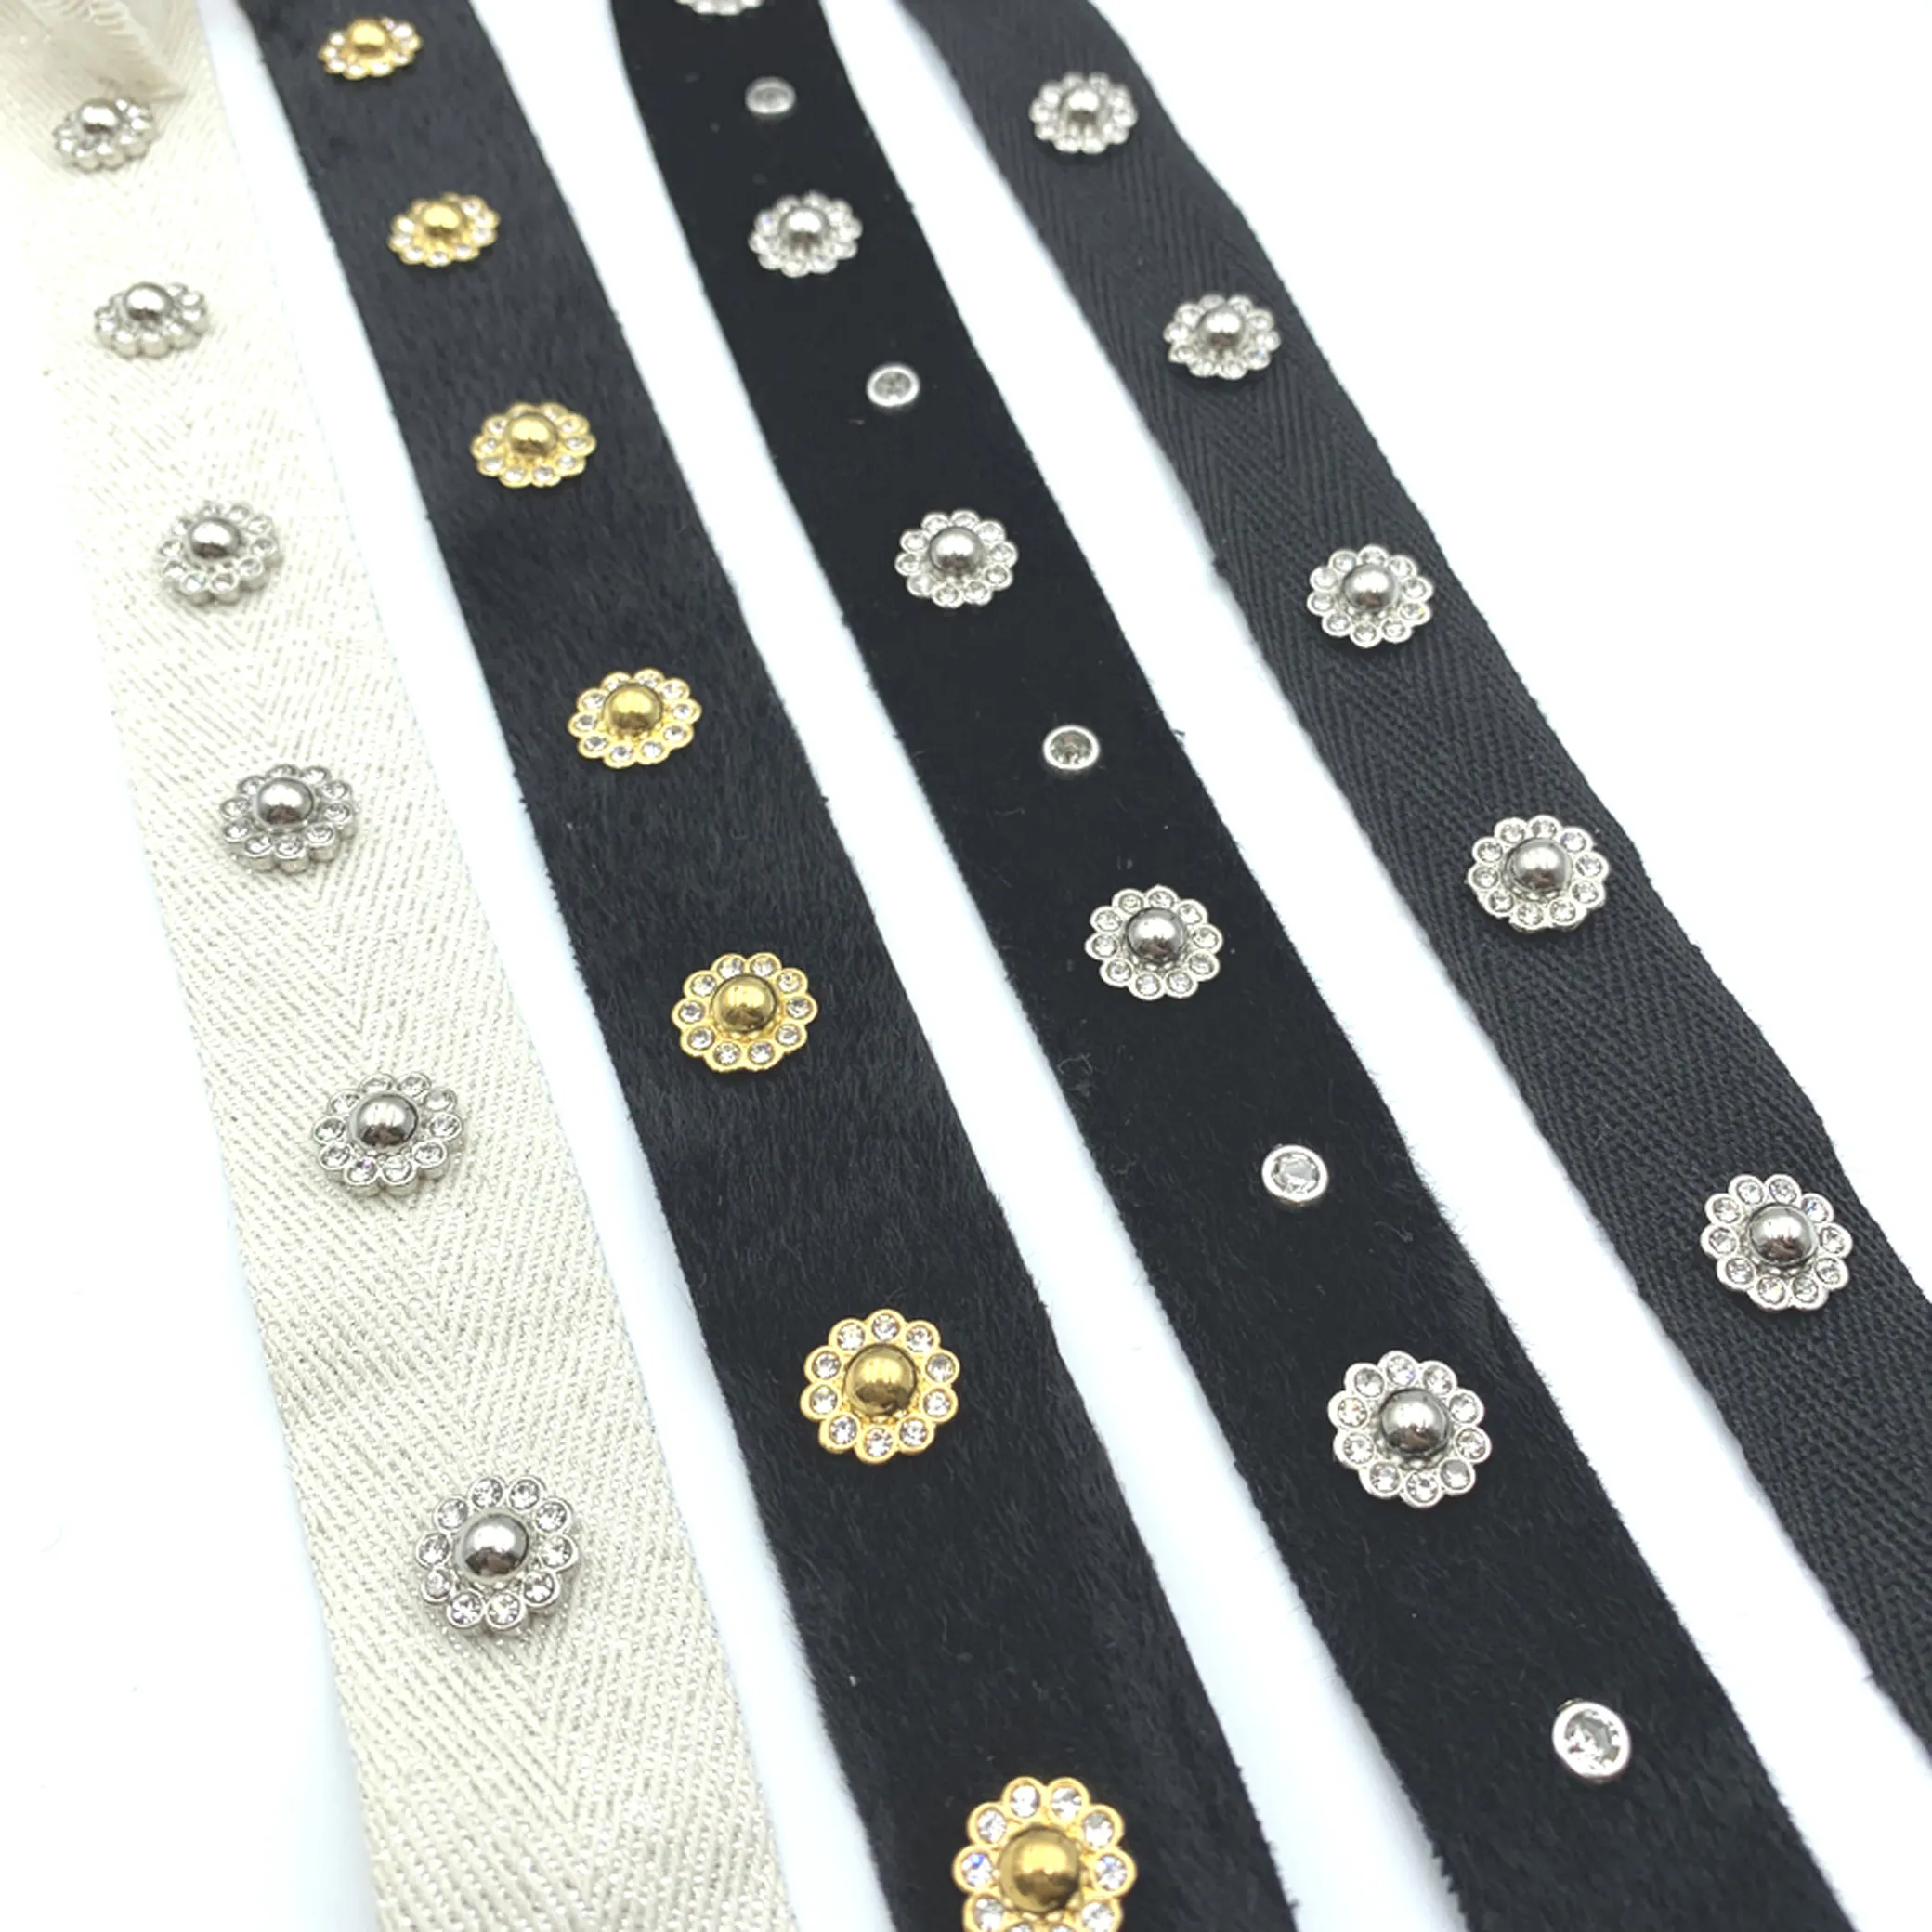 stud type lace trim with metal rivet tape using on garments ribbons